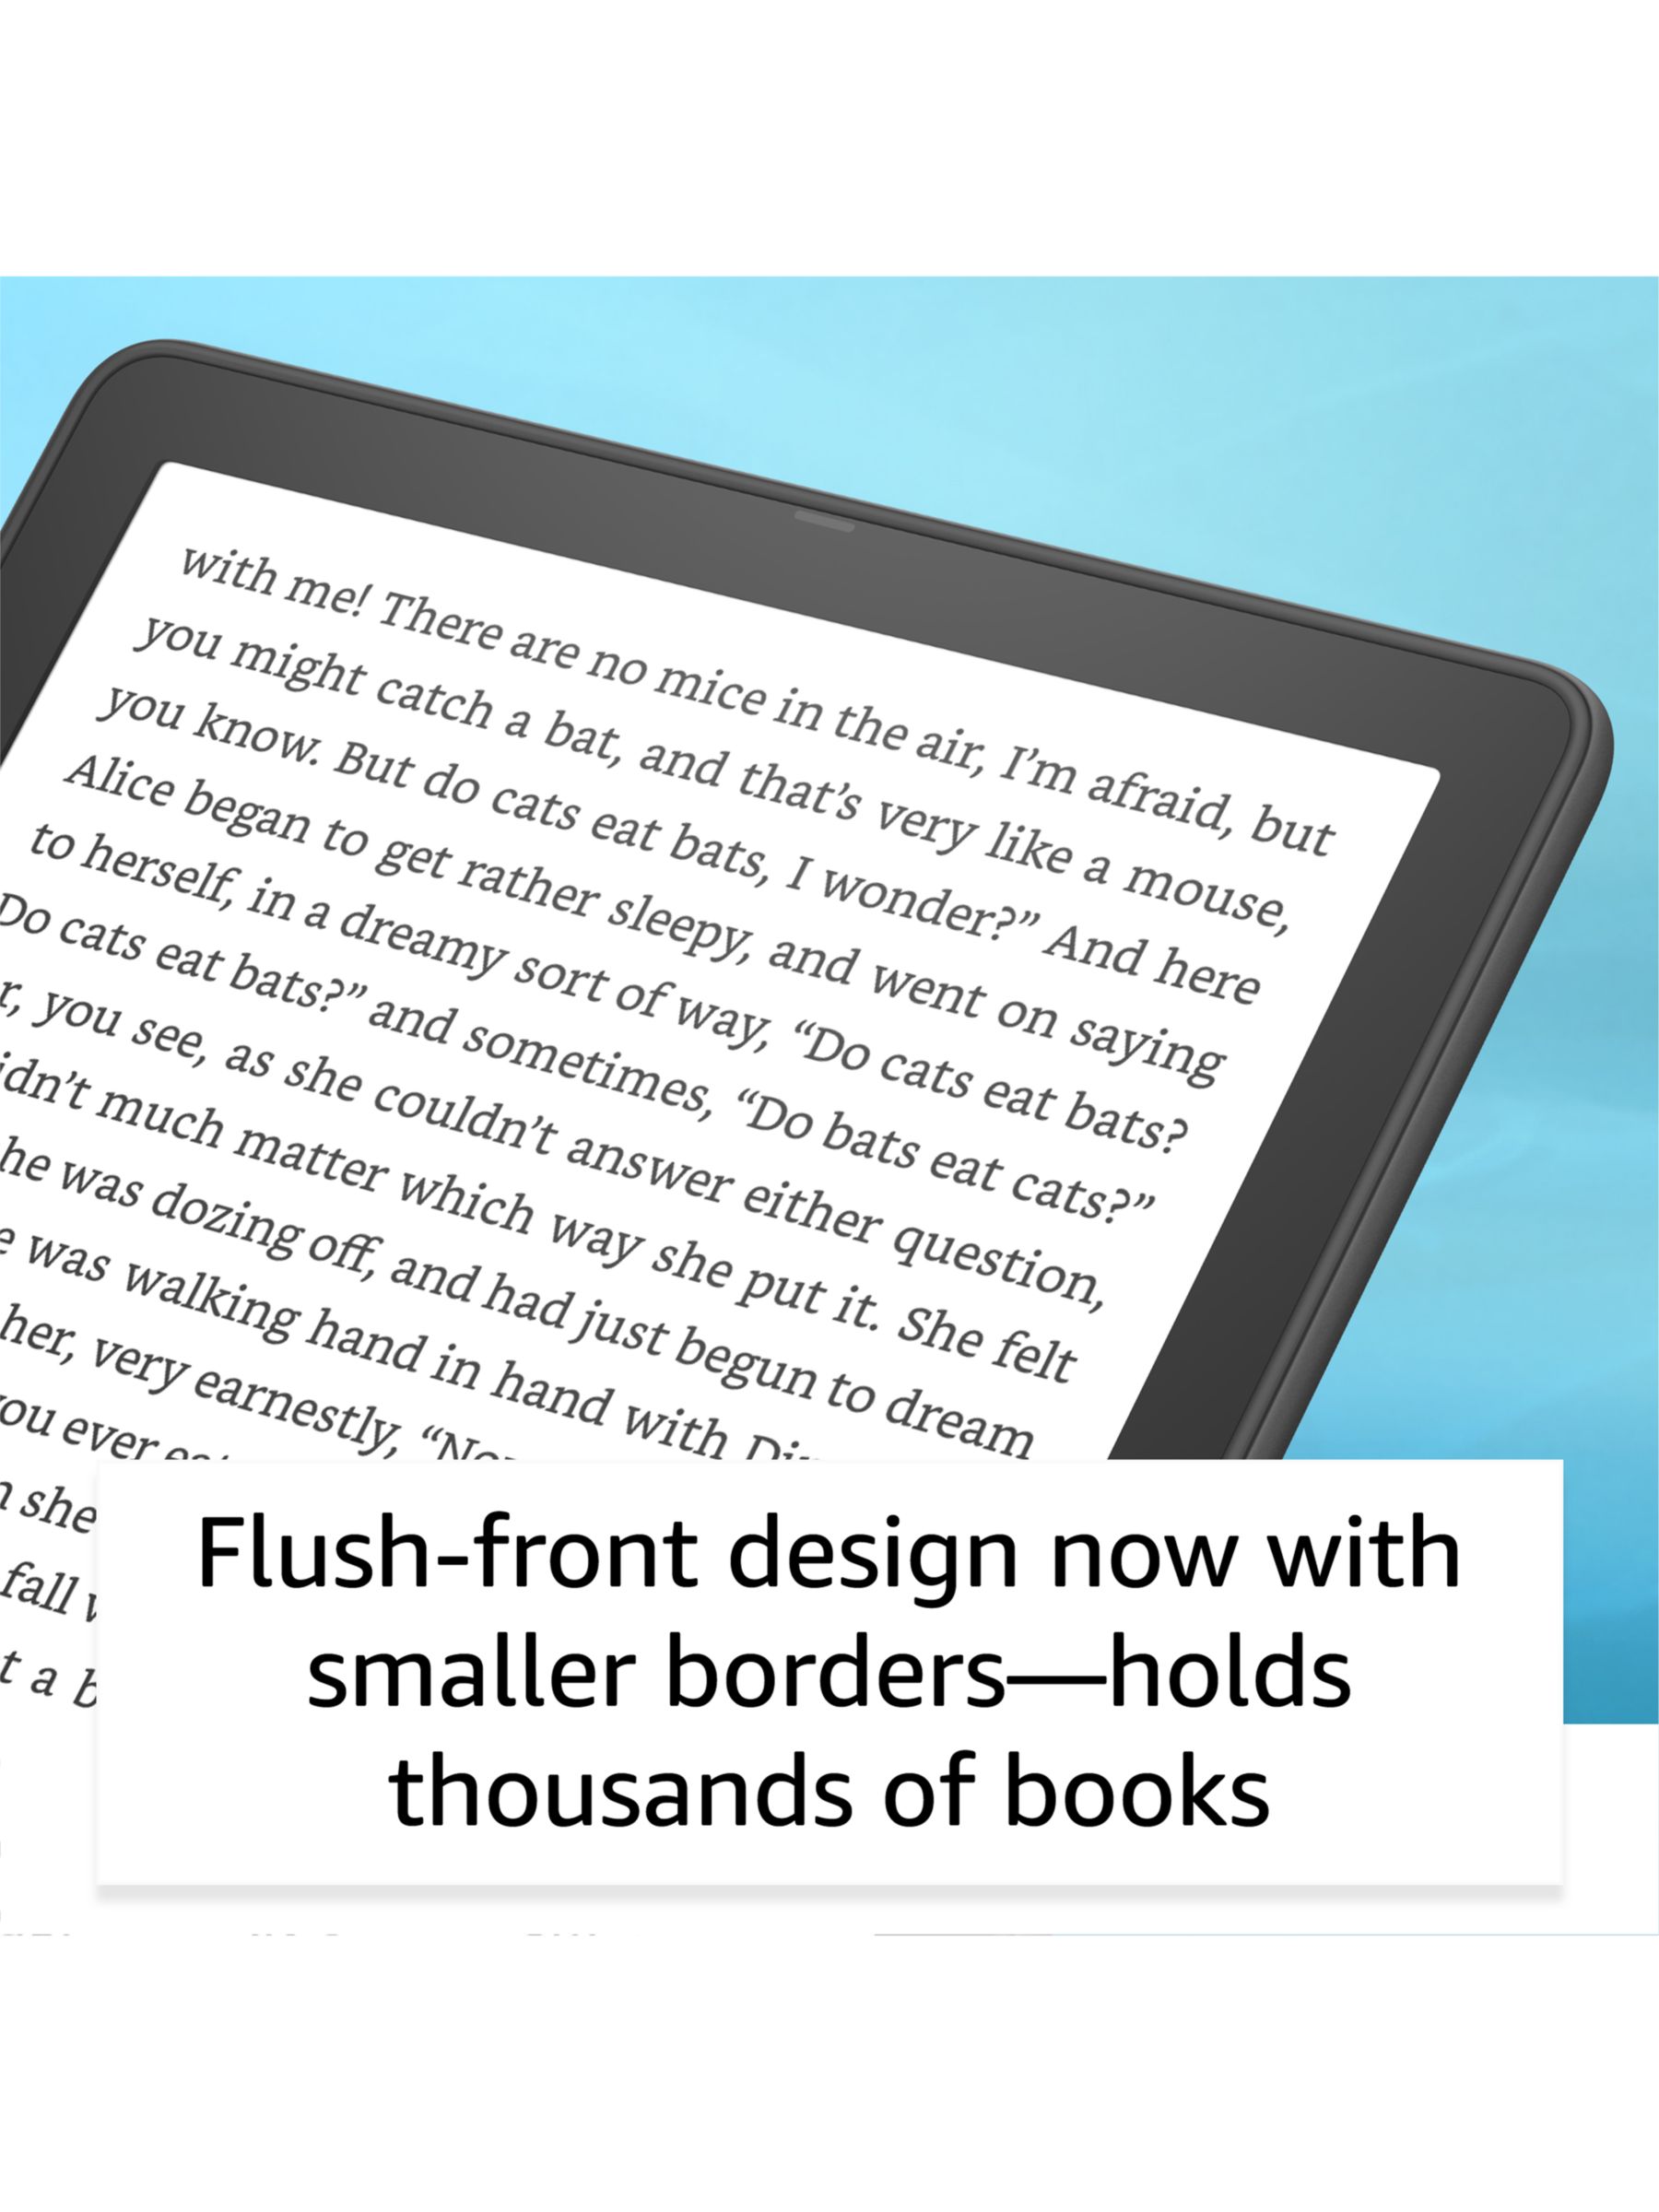 Kindle Paperwhite (8 GB) – Now with a 6.8 display and